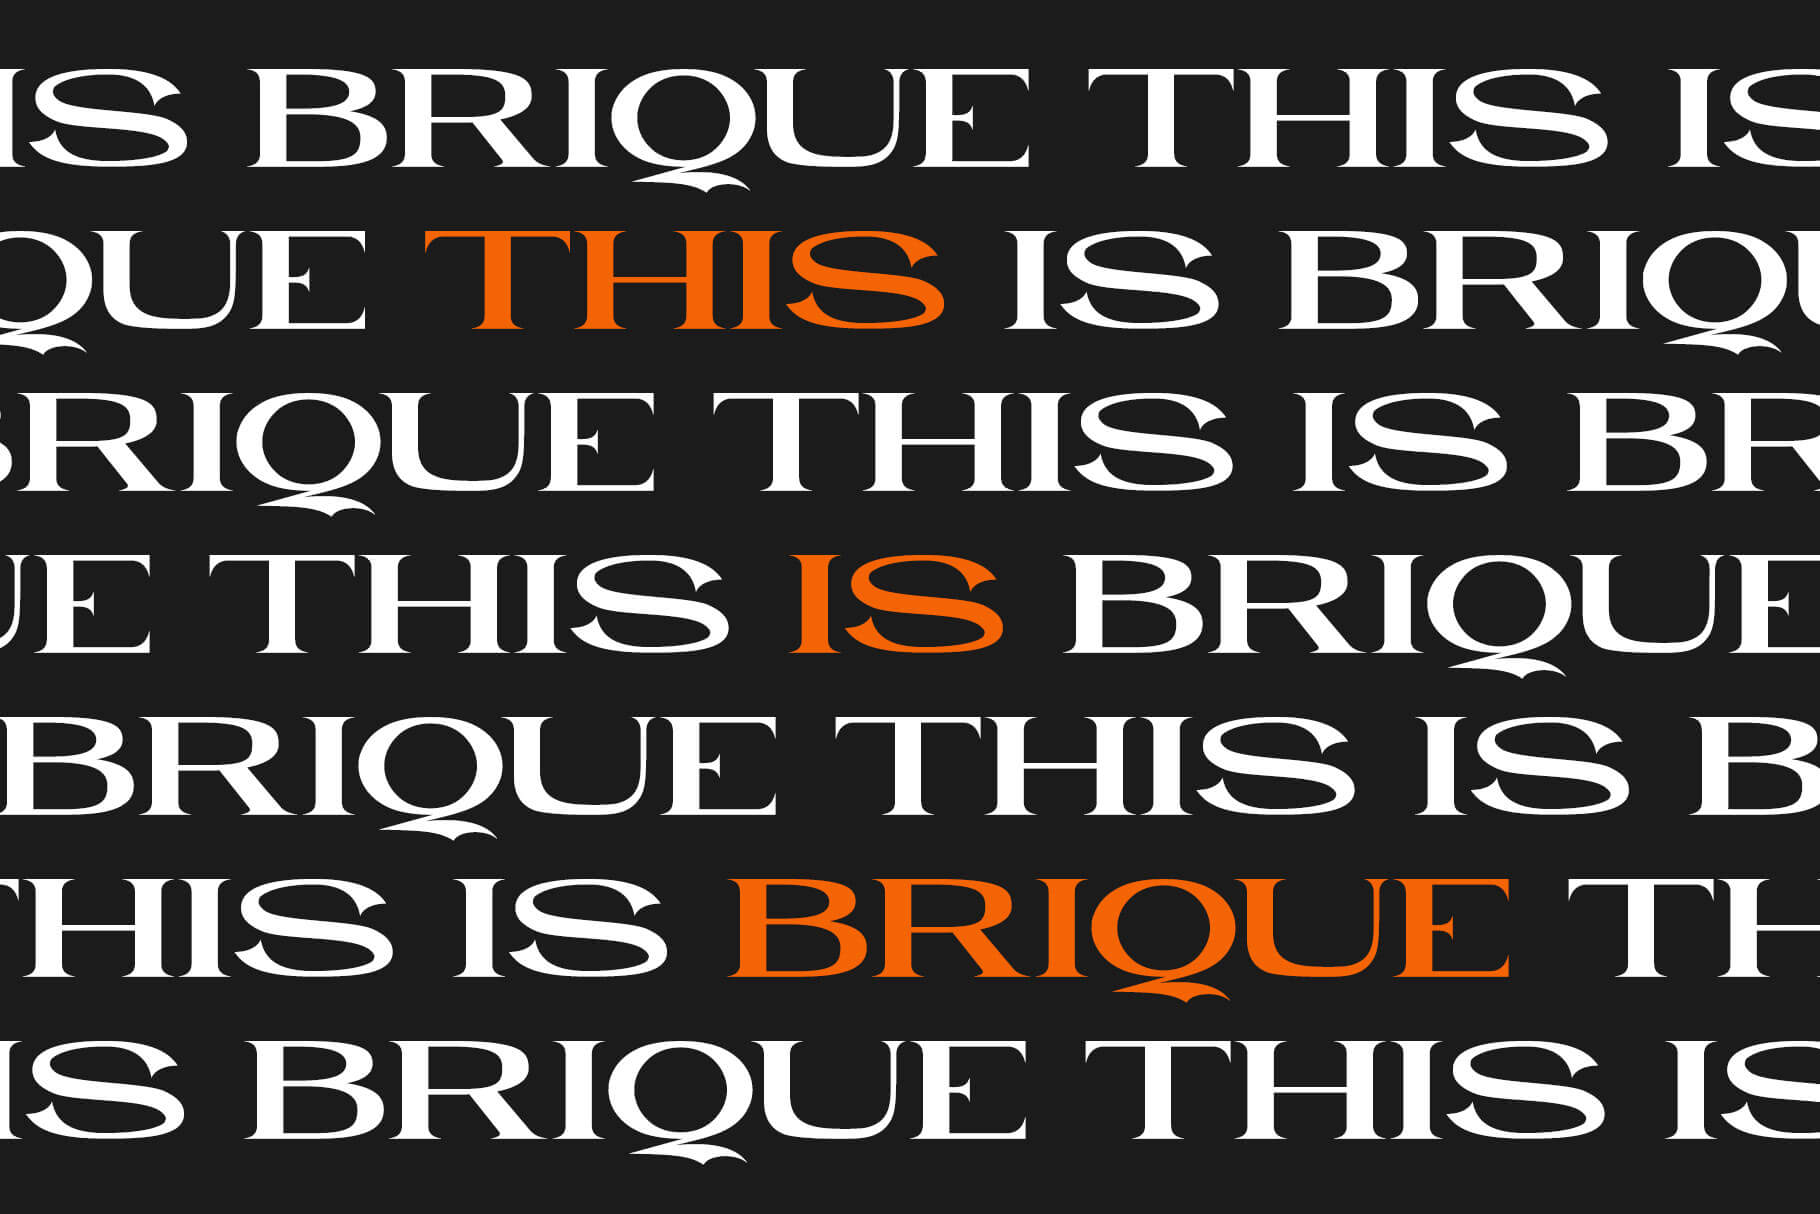 Brique Free Display Font is a lovely serif font that can be used for display purposes. It's ideal for magazine editorials, headlines, labels, fashion prints, posters, and other similar projects. This font can be used for both personal and commercial purposes! It does not, however, contain lowercase letters, marks, or punctuation. As a result, keep an eye out for updates here!